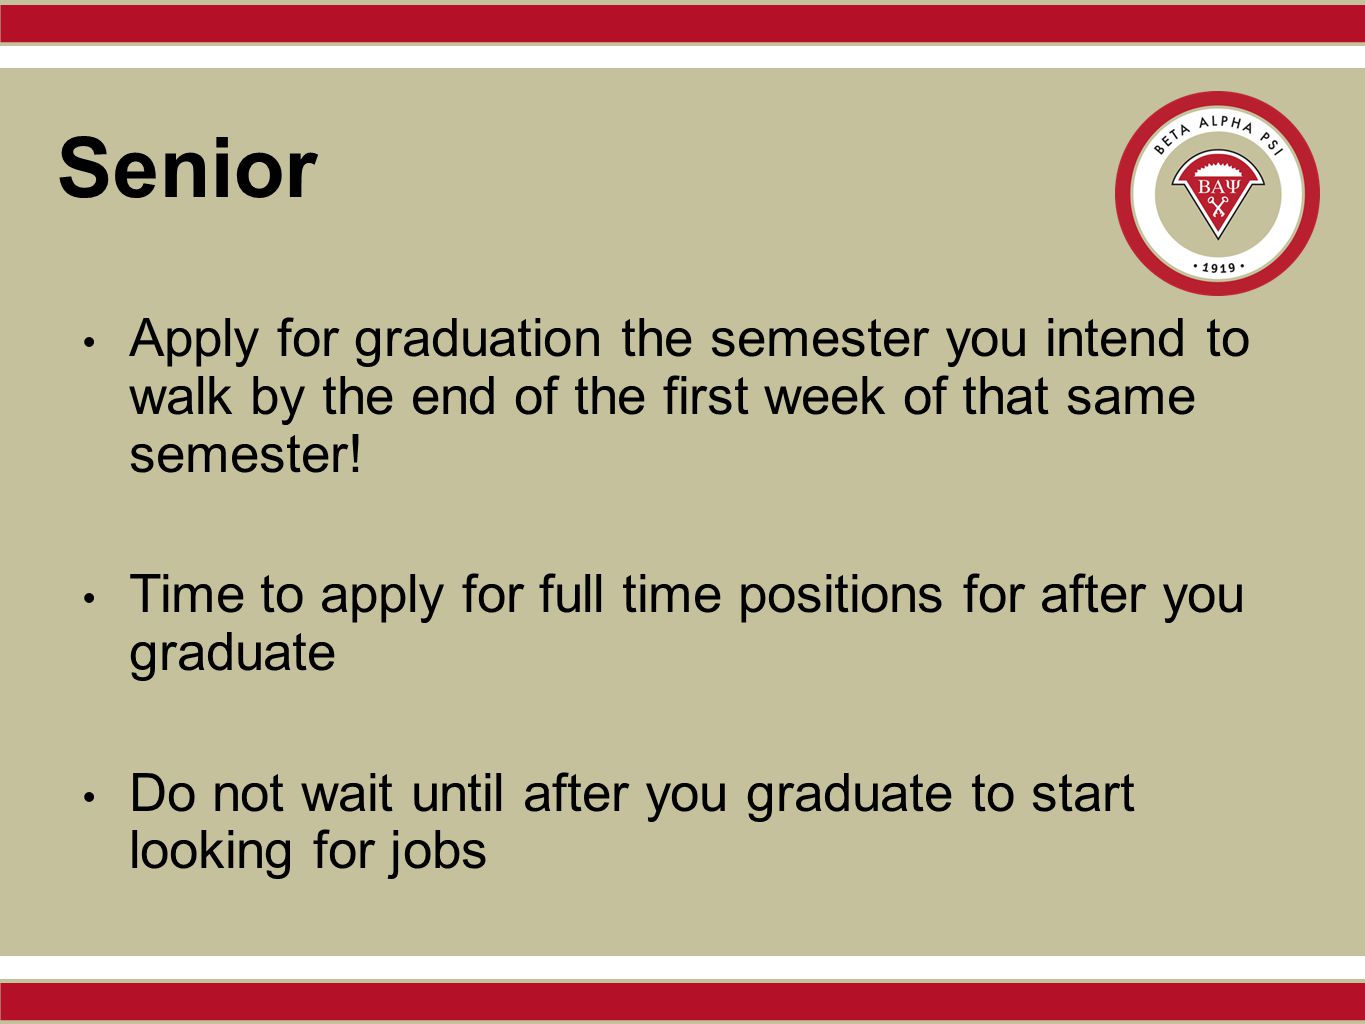 Senior Apply for graduation the semester you intend to walk by the end of the first week of that same semester.